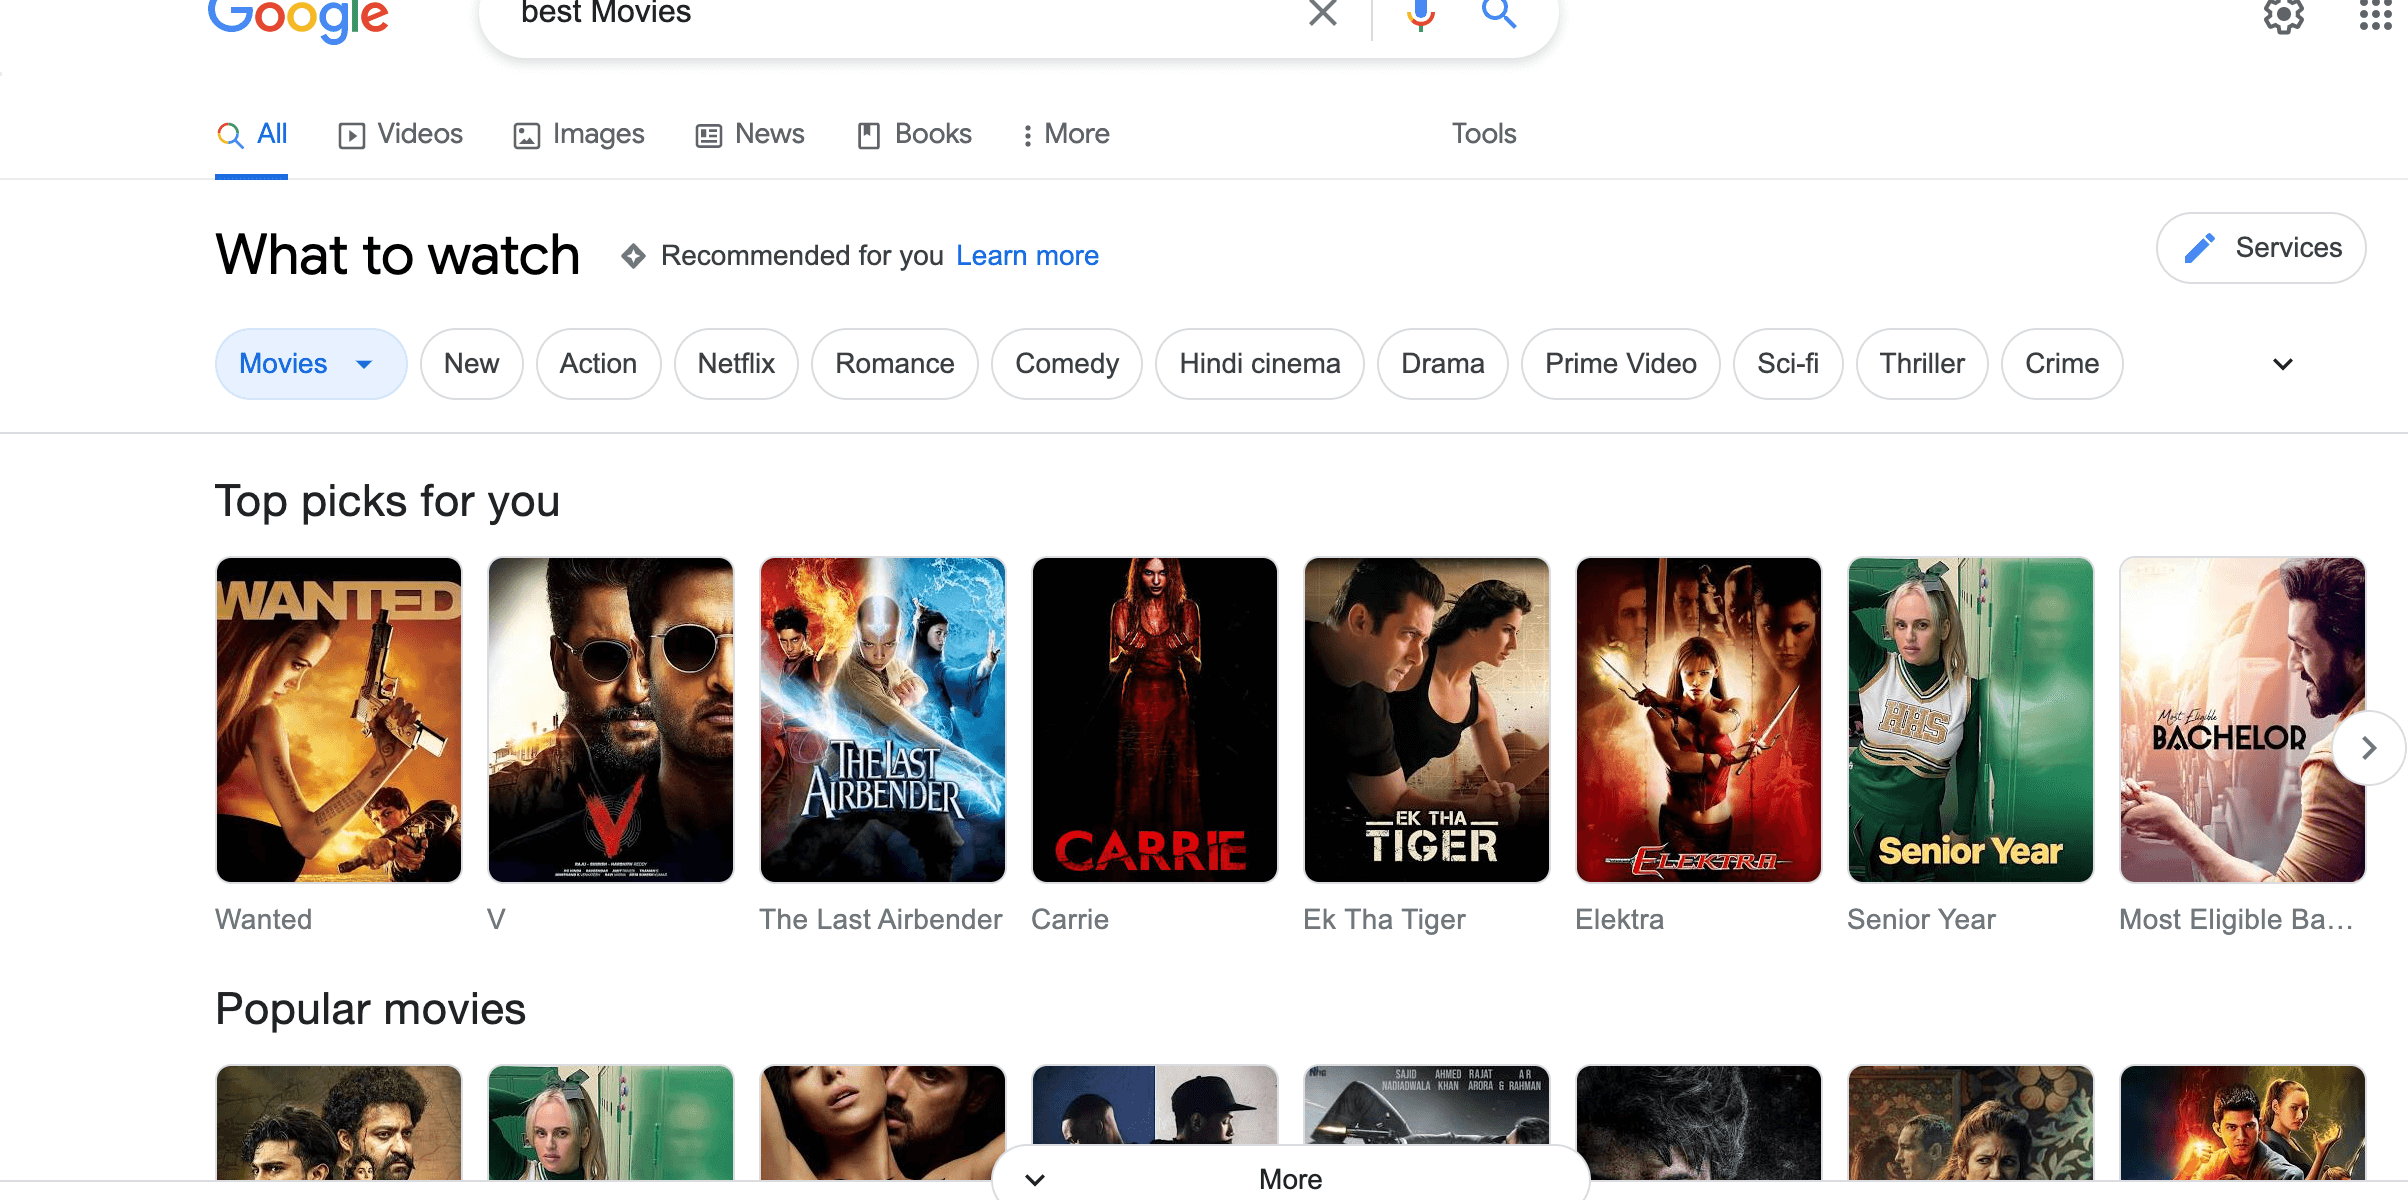 best Movies to watch recommended by Google